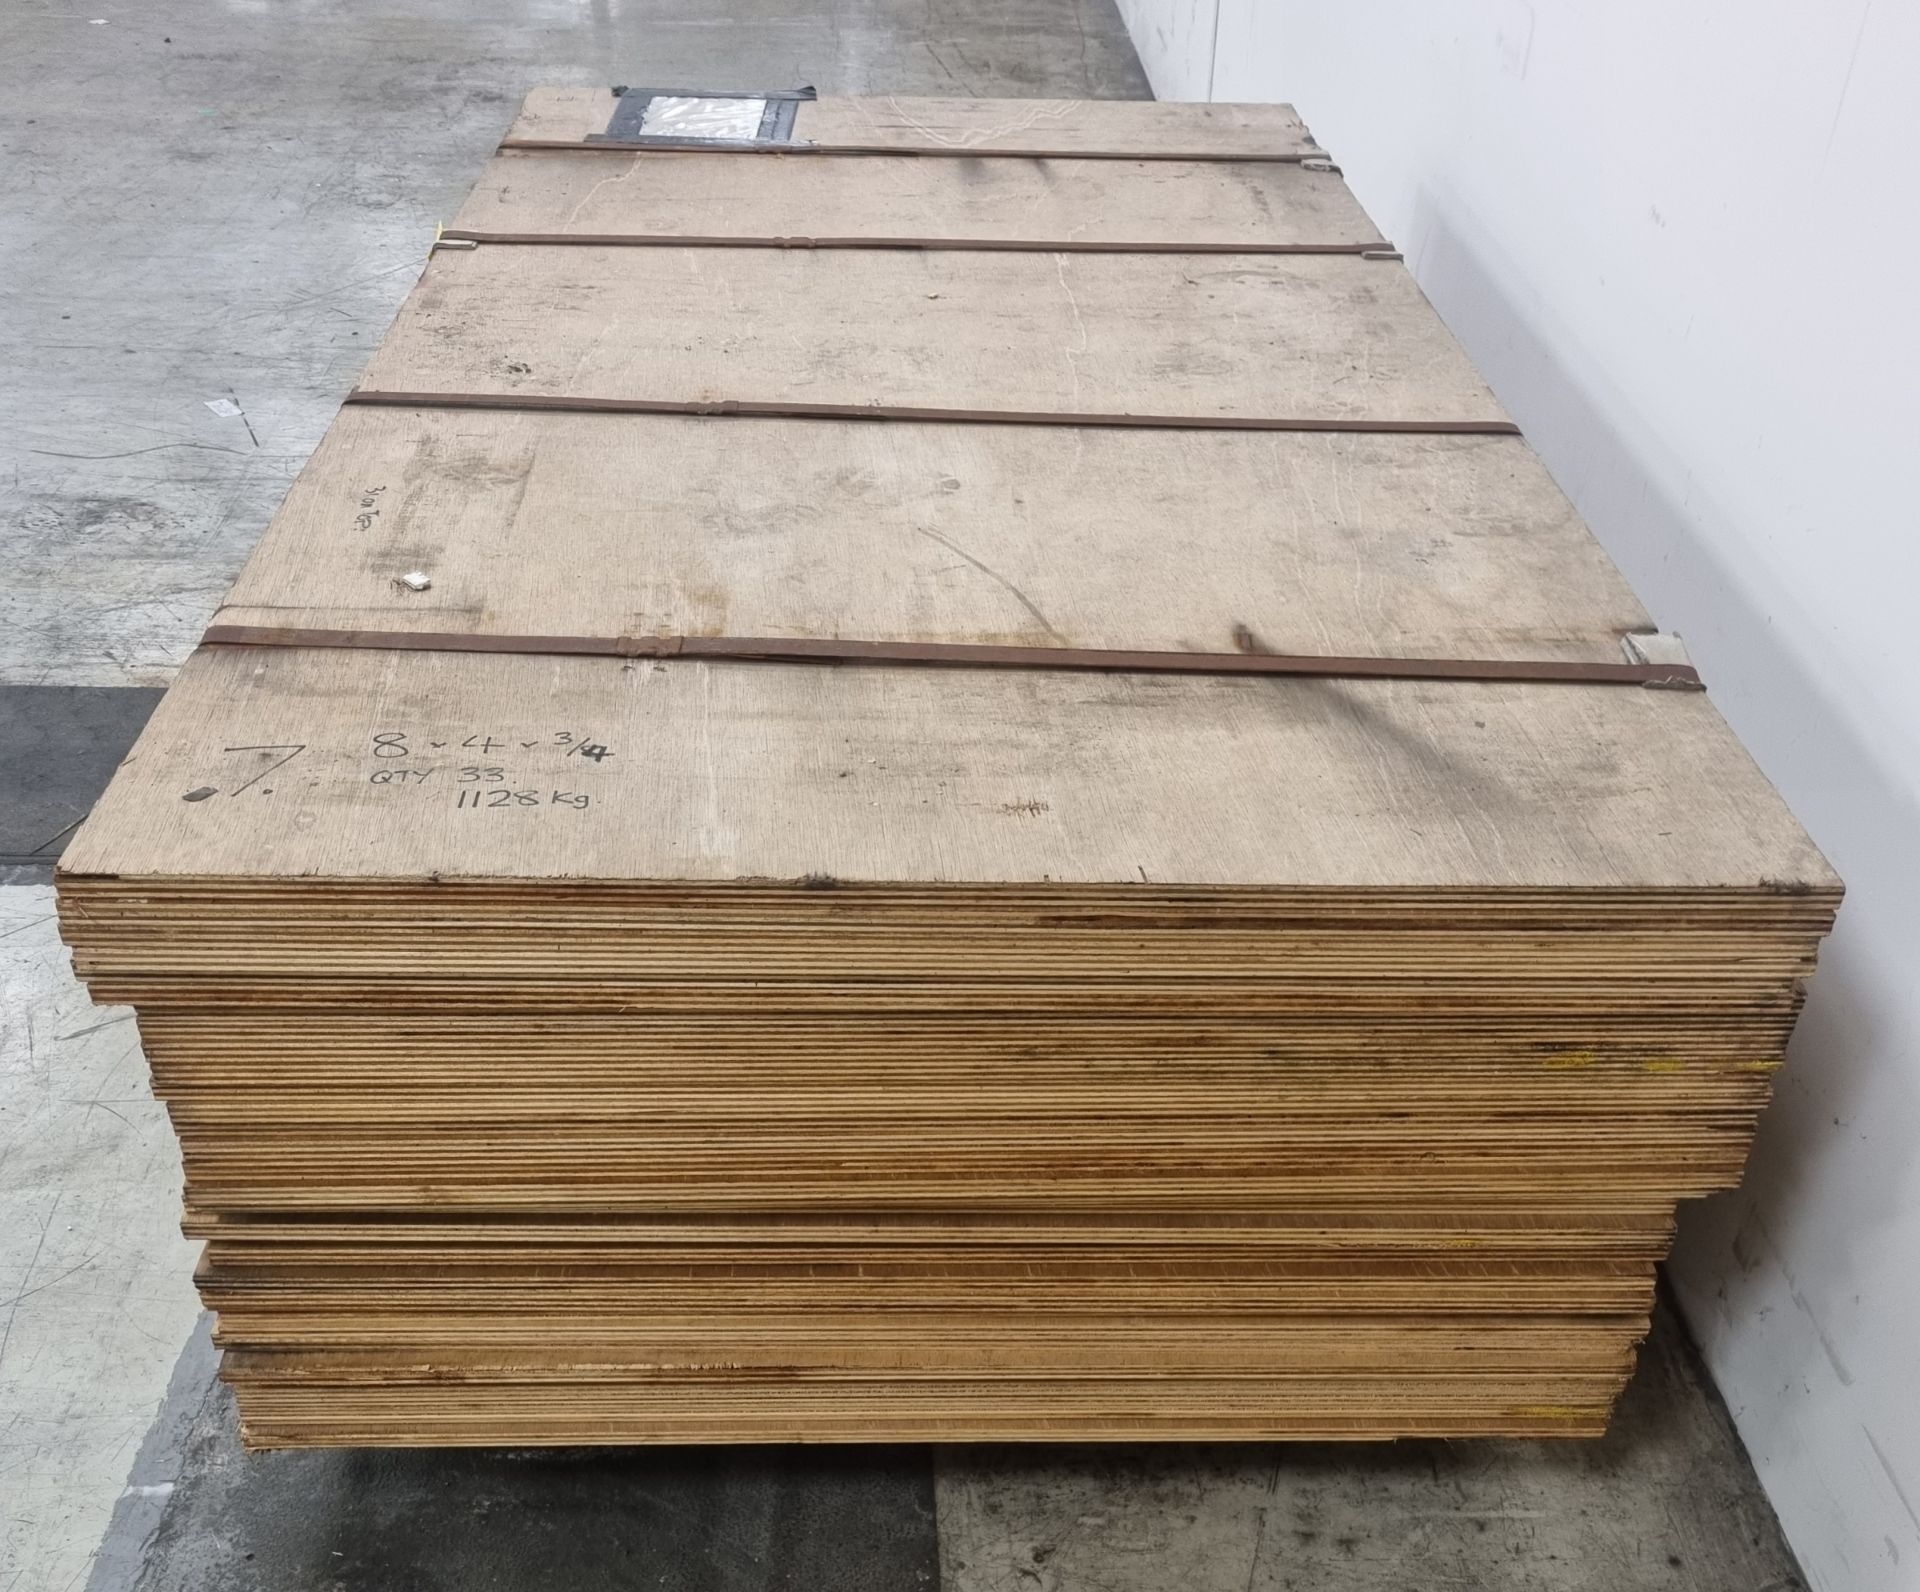 Pallet of 18mm Class 2 plywood - 8x4ft (244x122cm) - 33 sheets - Image 3 of 5